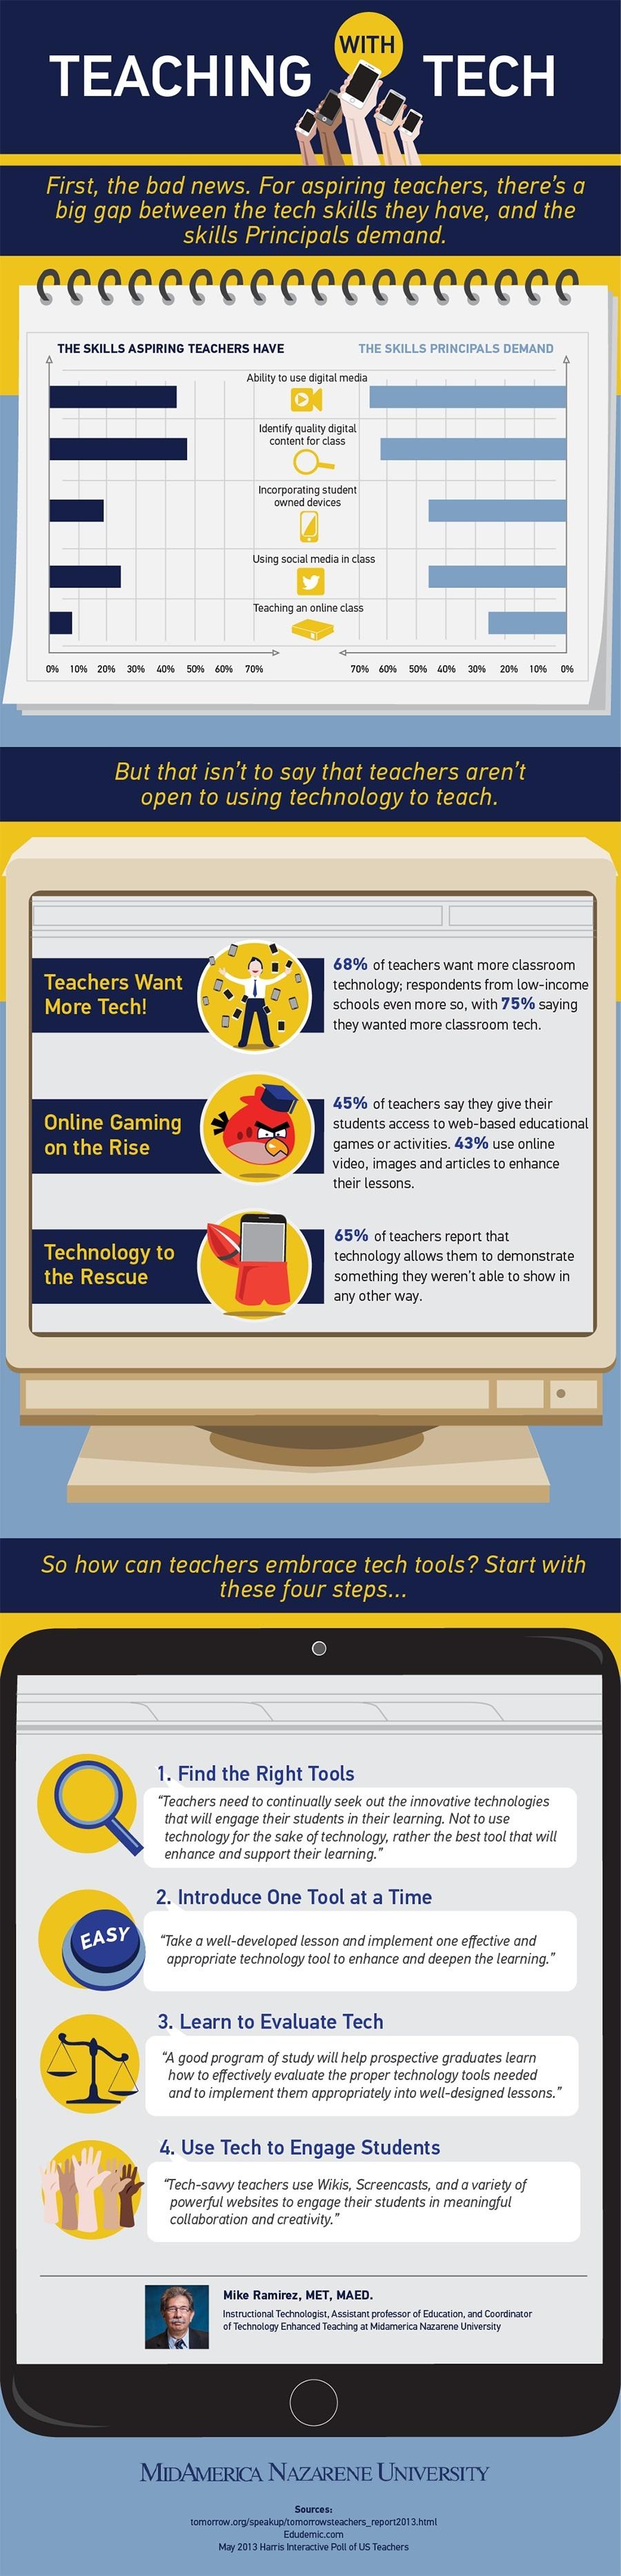 Using-technology-in-the-classroom-infographic